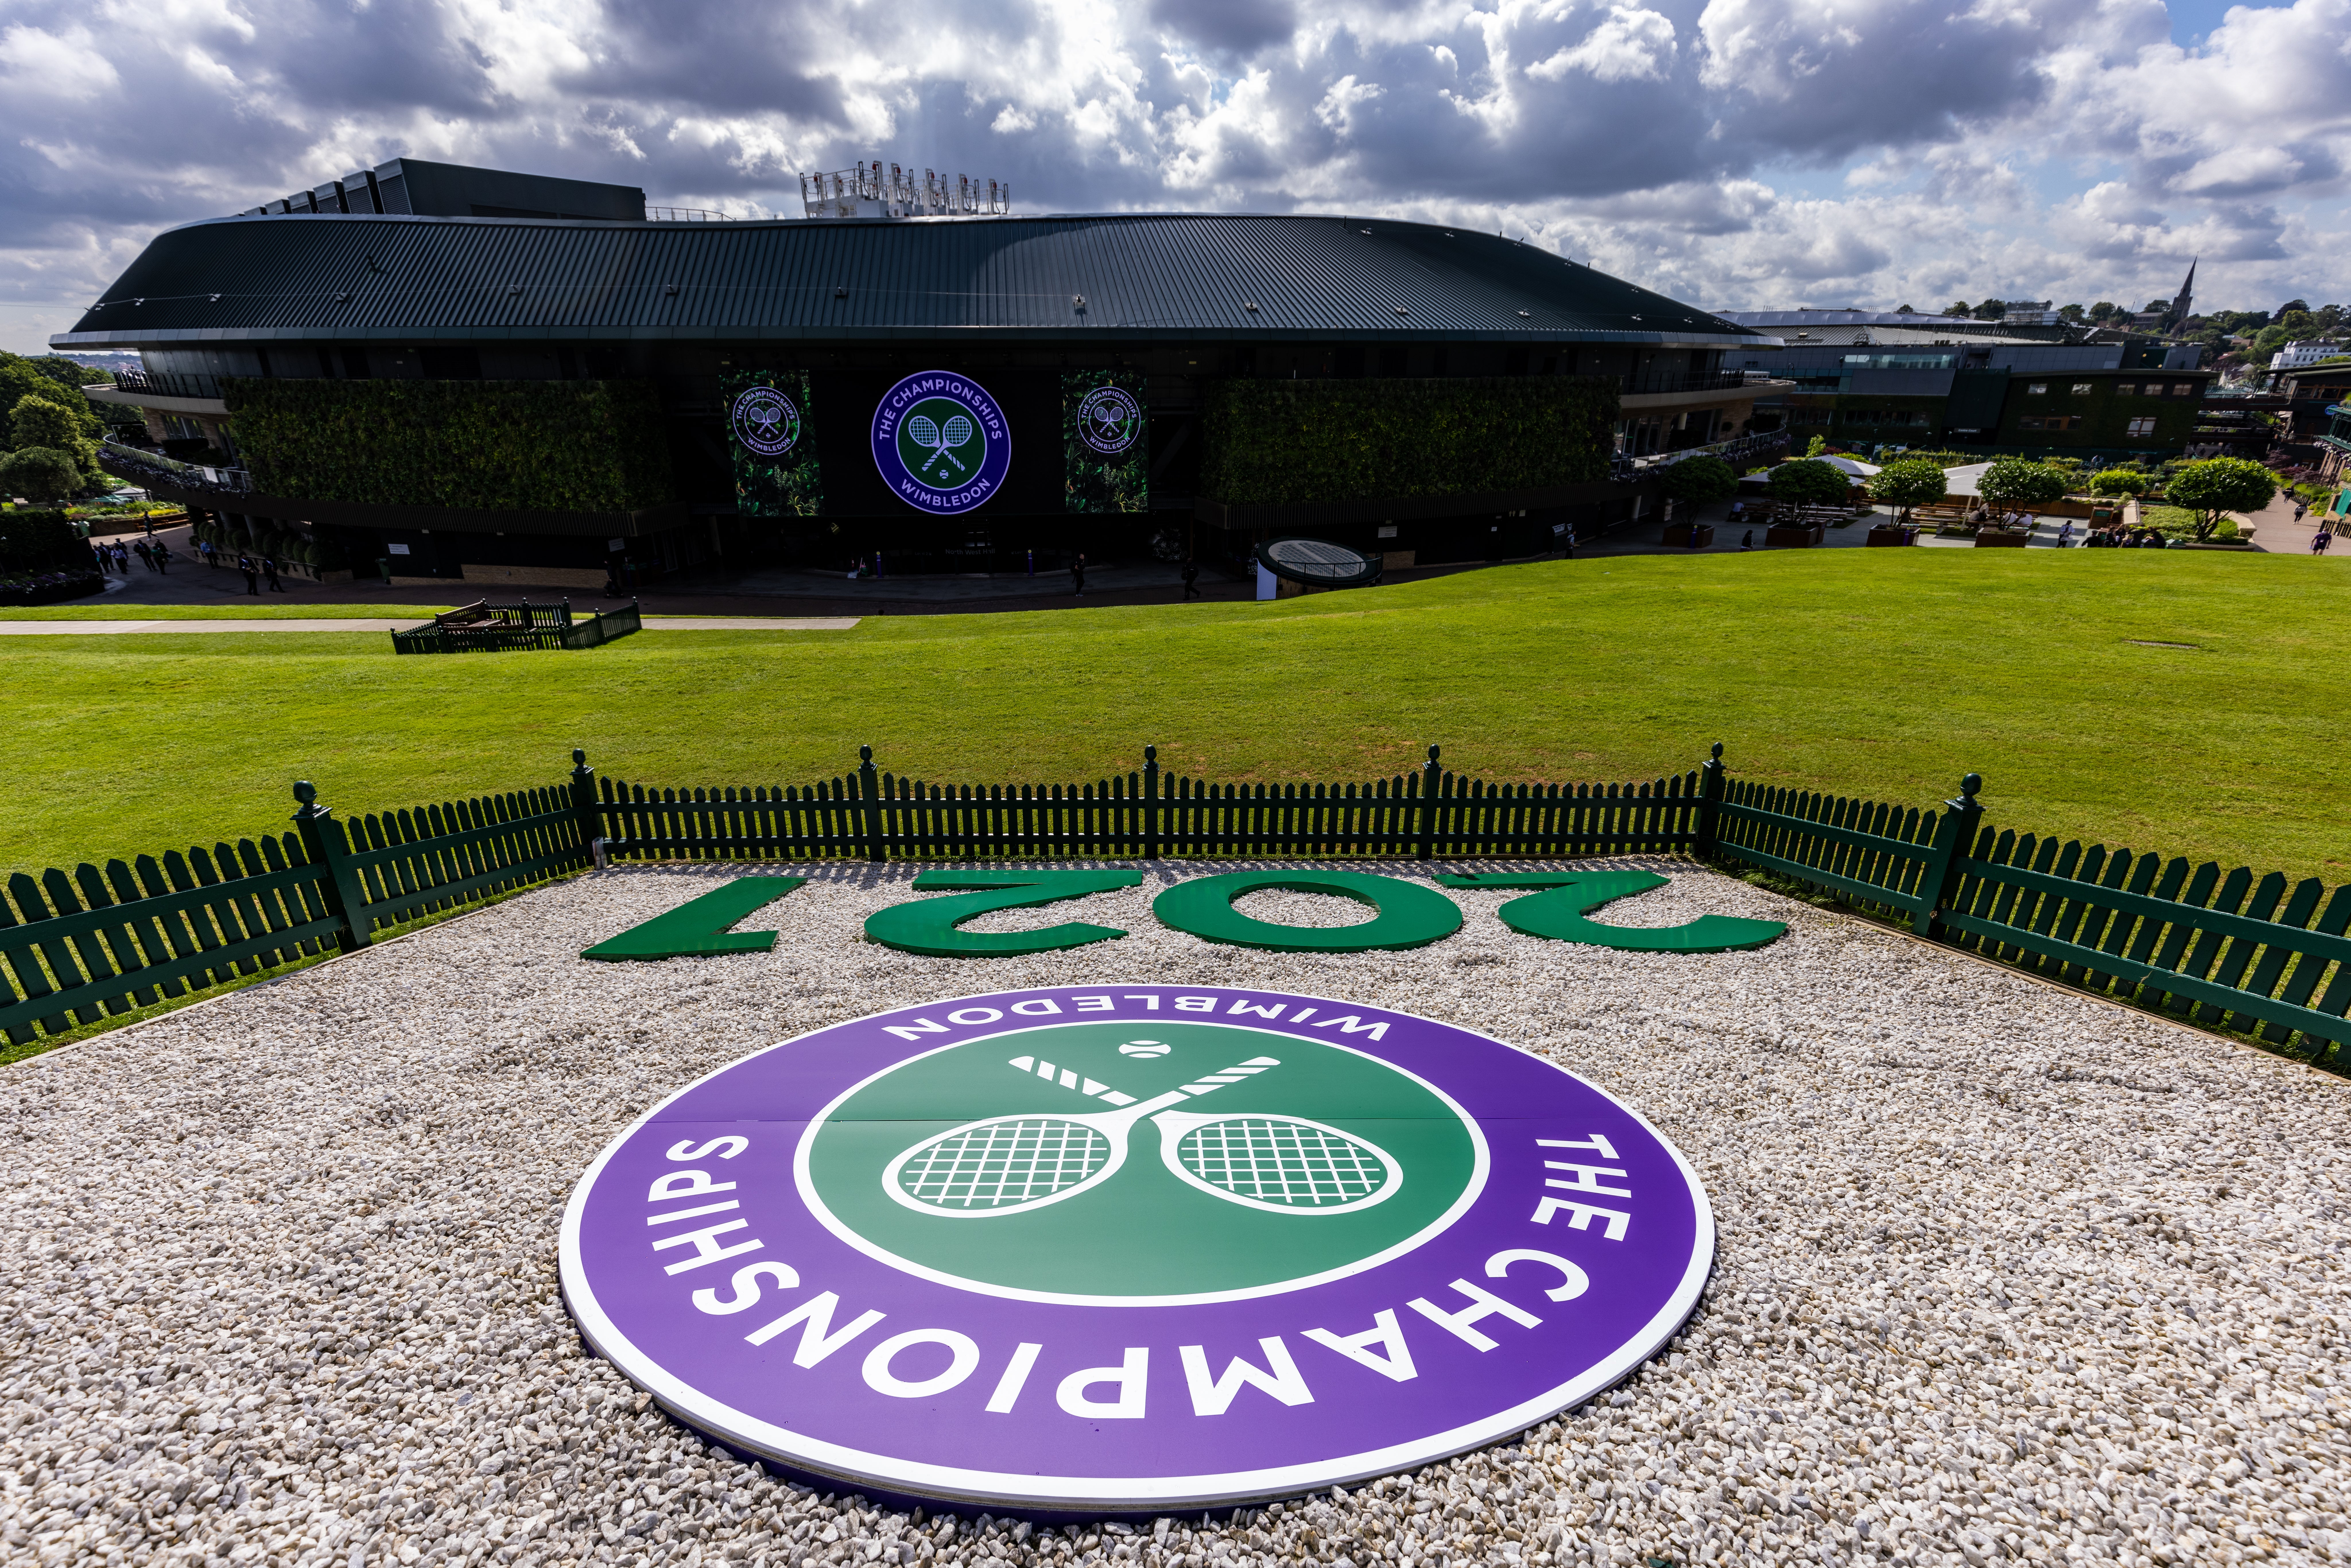 Two matches from this year's Wimbledon are being investigated for possible irregular betting patterns